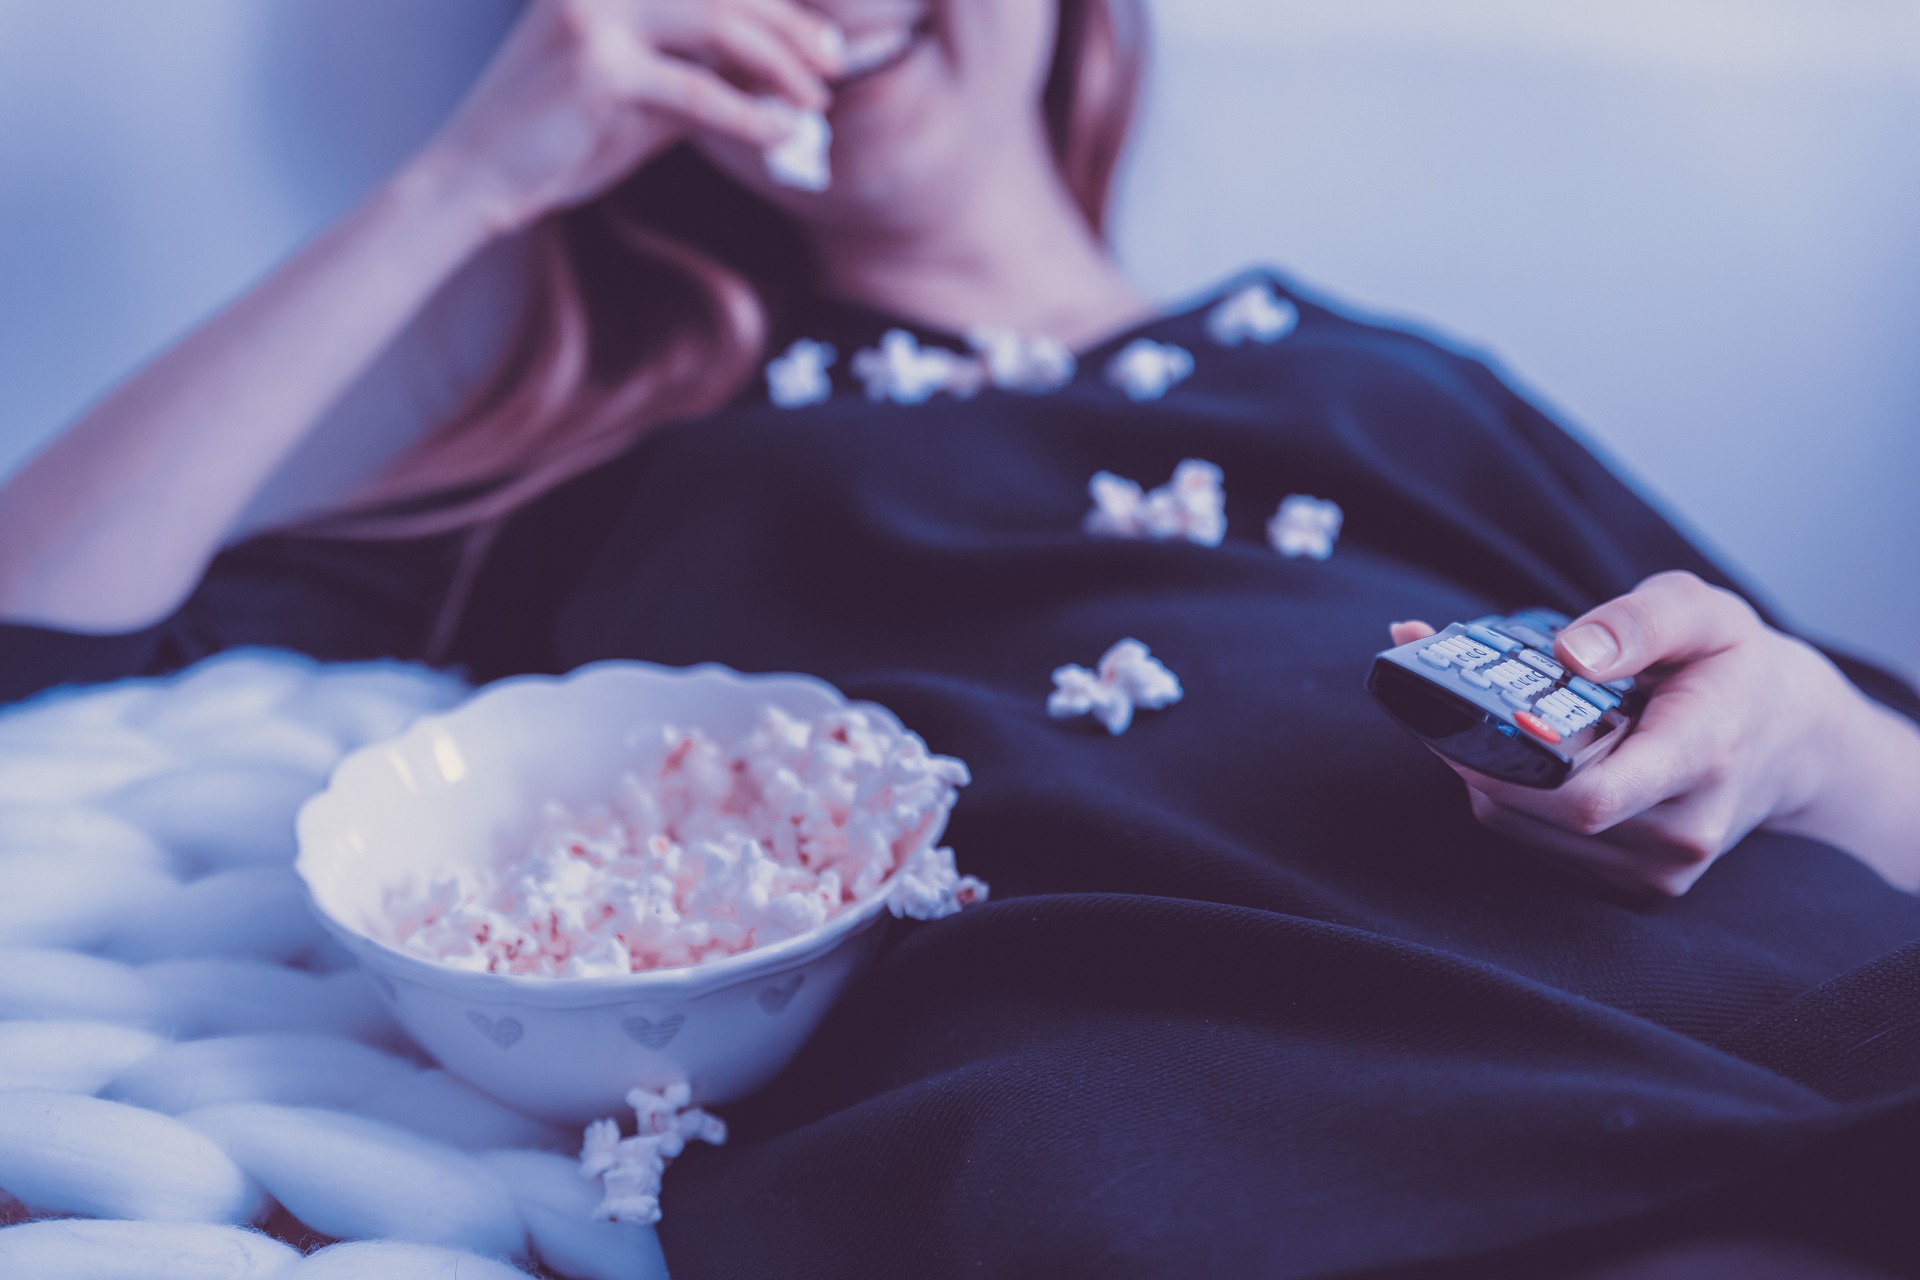 A woman is eating popcorn in bed while holding a TV remote